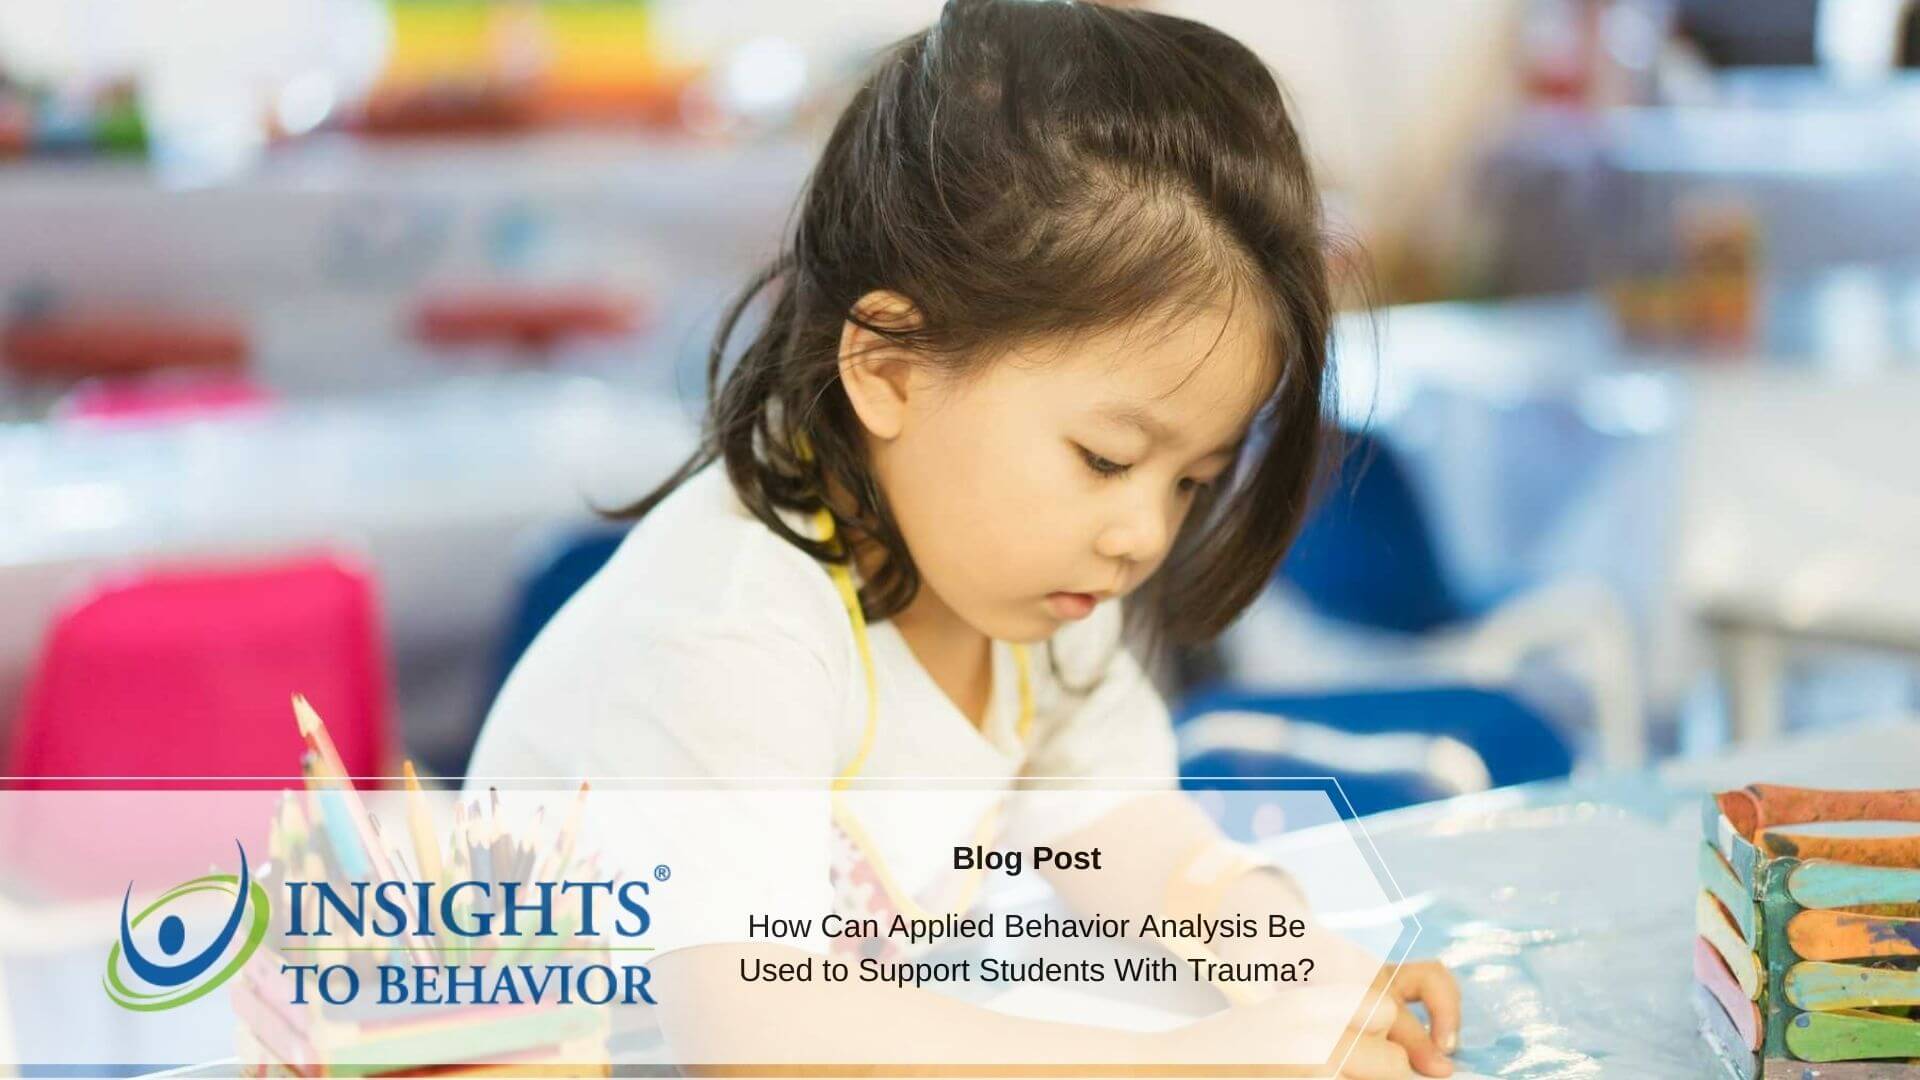 Insights to behavior blog post image template (1)